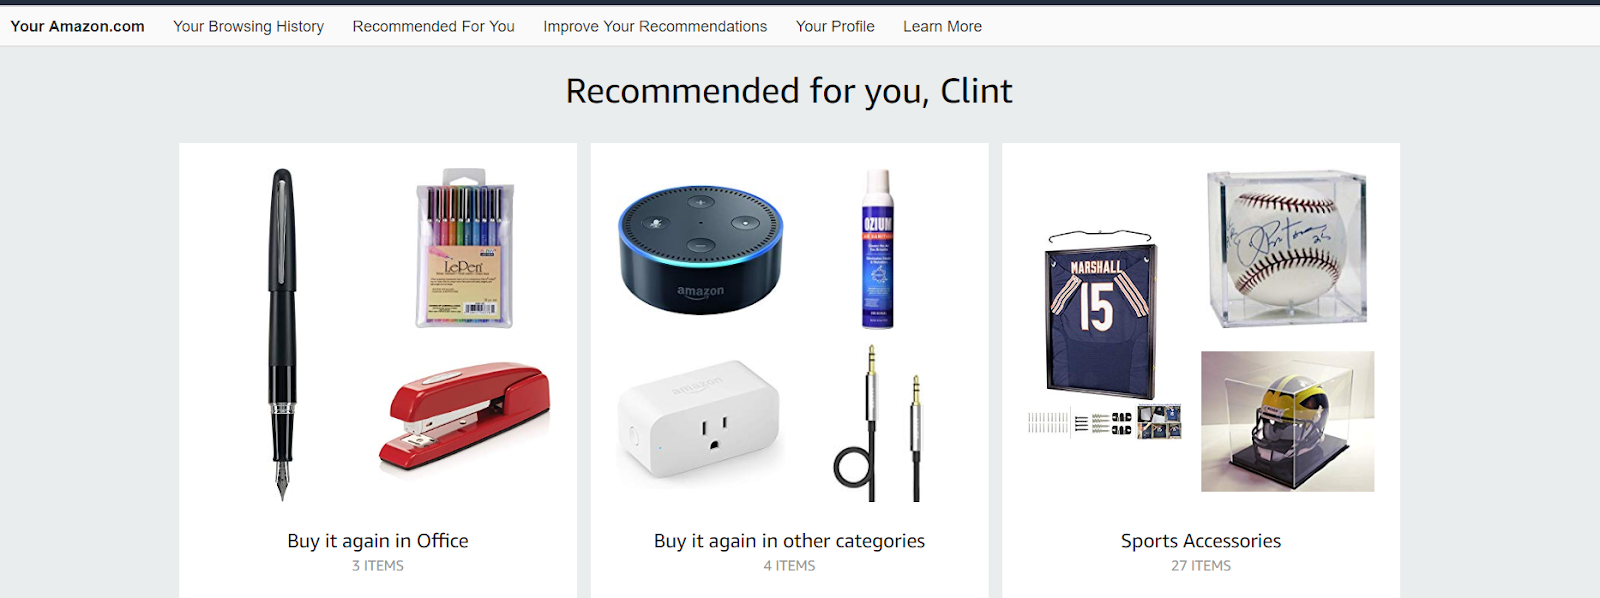 Amazon-recommended